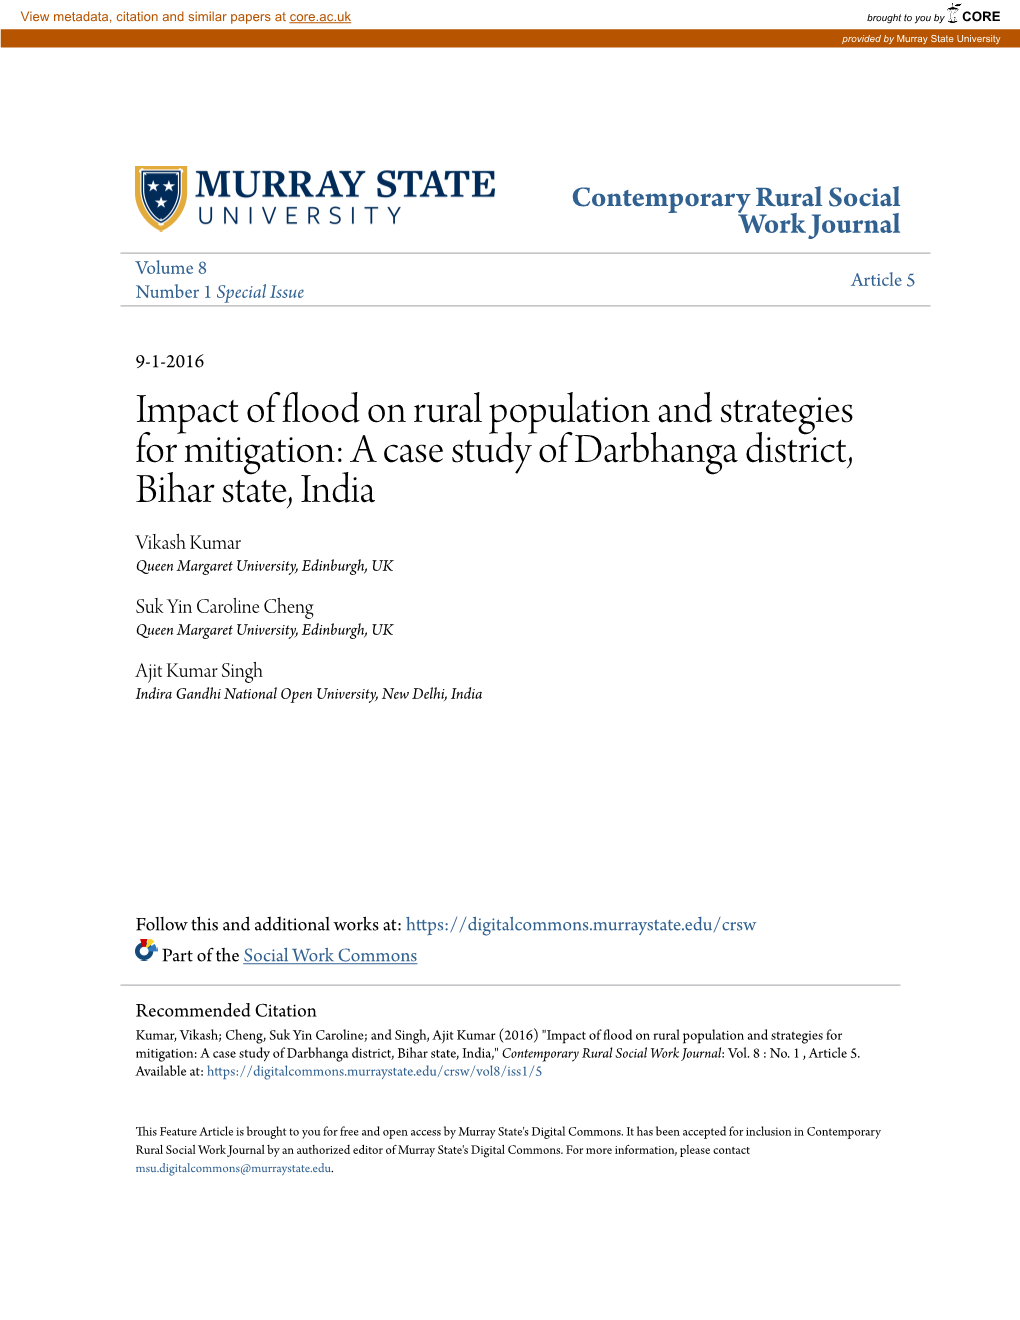 Impact of Flood on Rural Population and Strategies for Mitigation: a Case